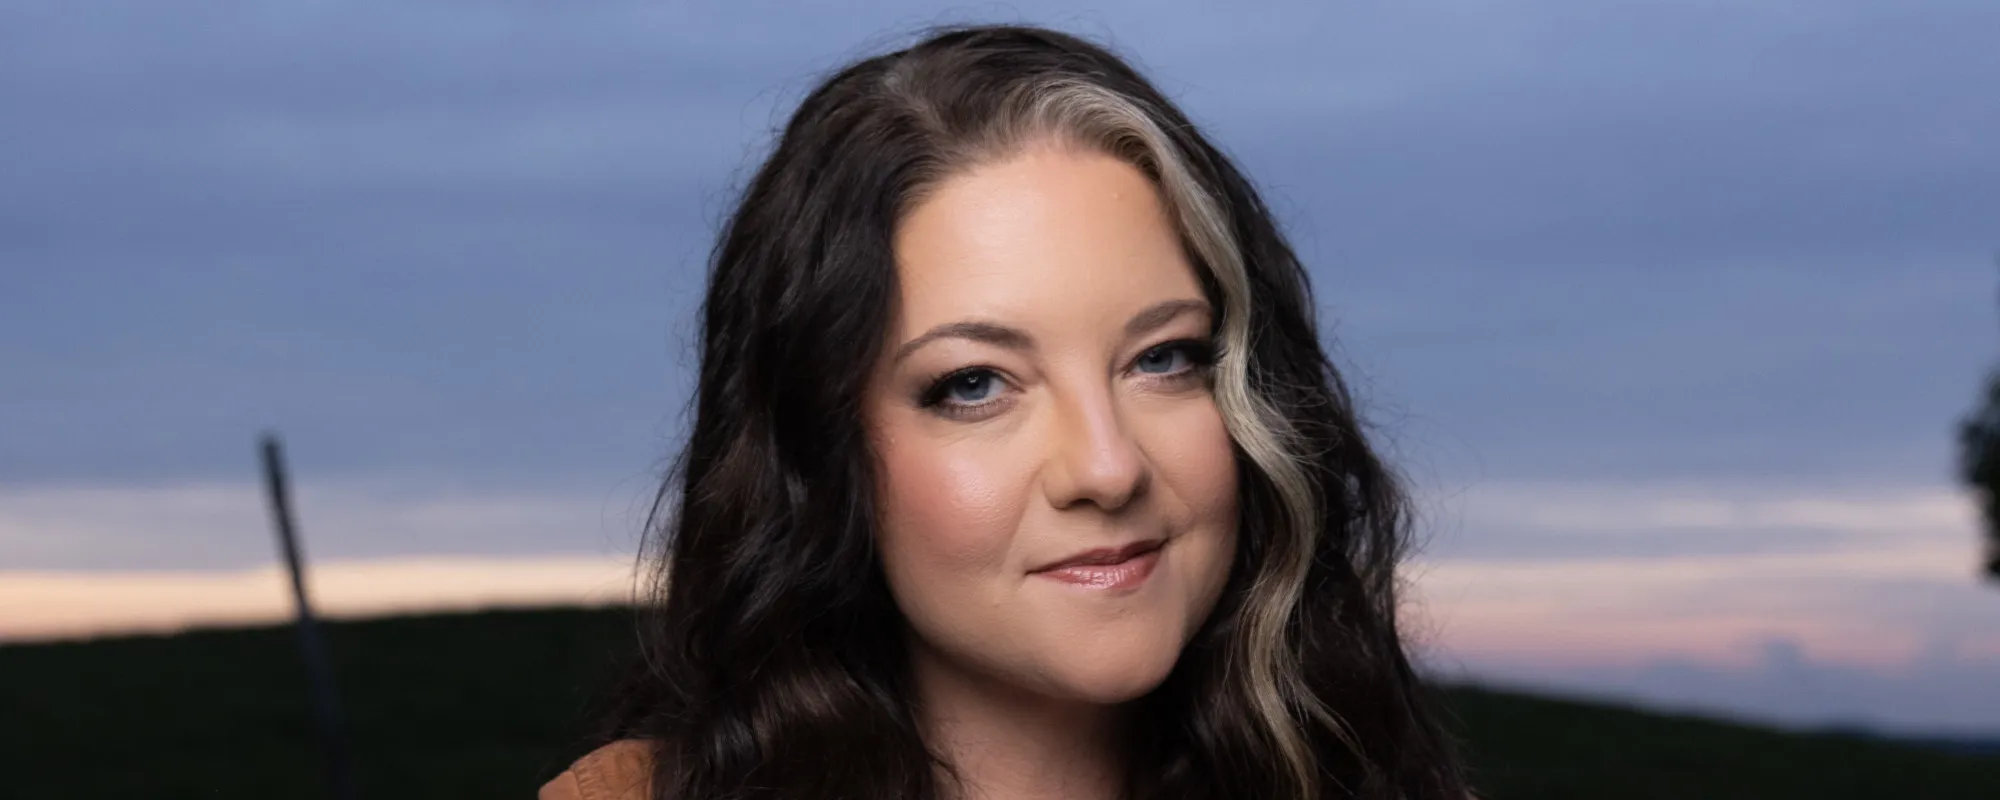 Ashley McBryde Shines Spotlight on Unglamorous Side of Touring with “Made For This”